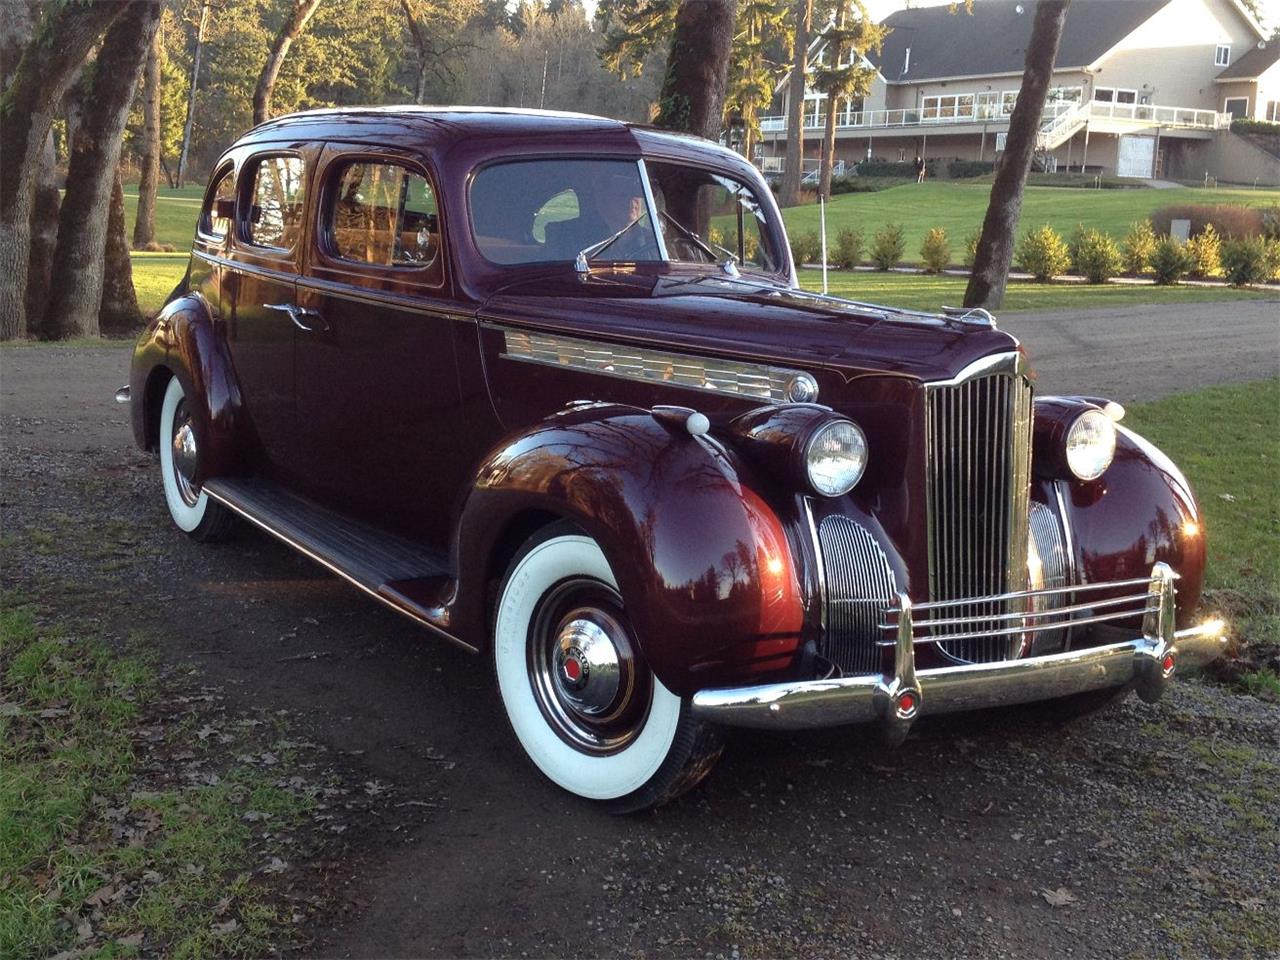 1940 Packard 110 for Sale | ClassicCars.com | CC-1247889